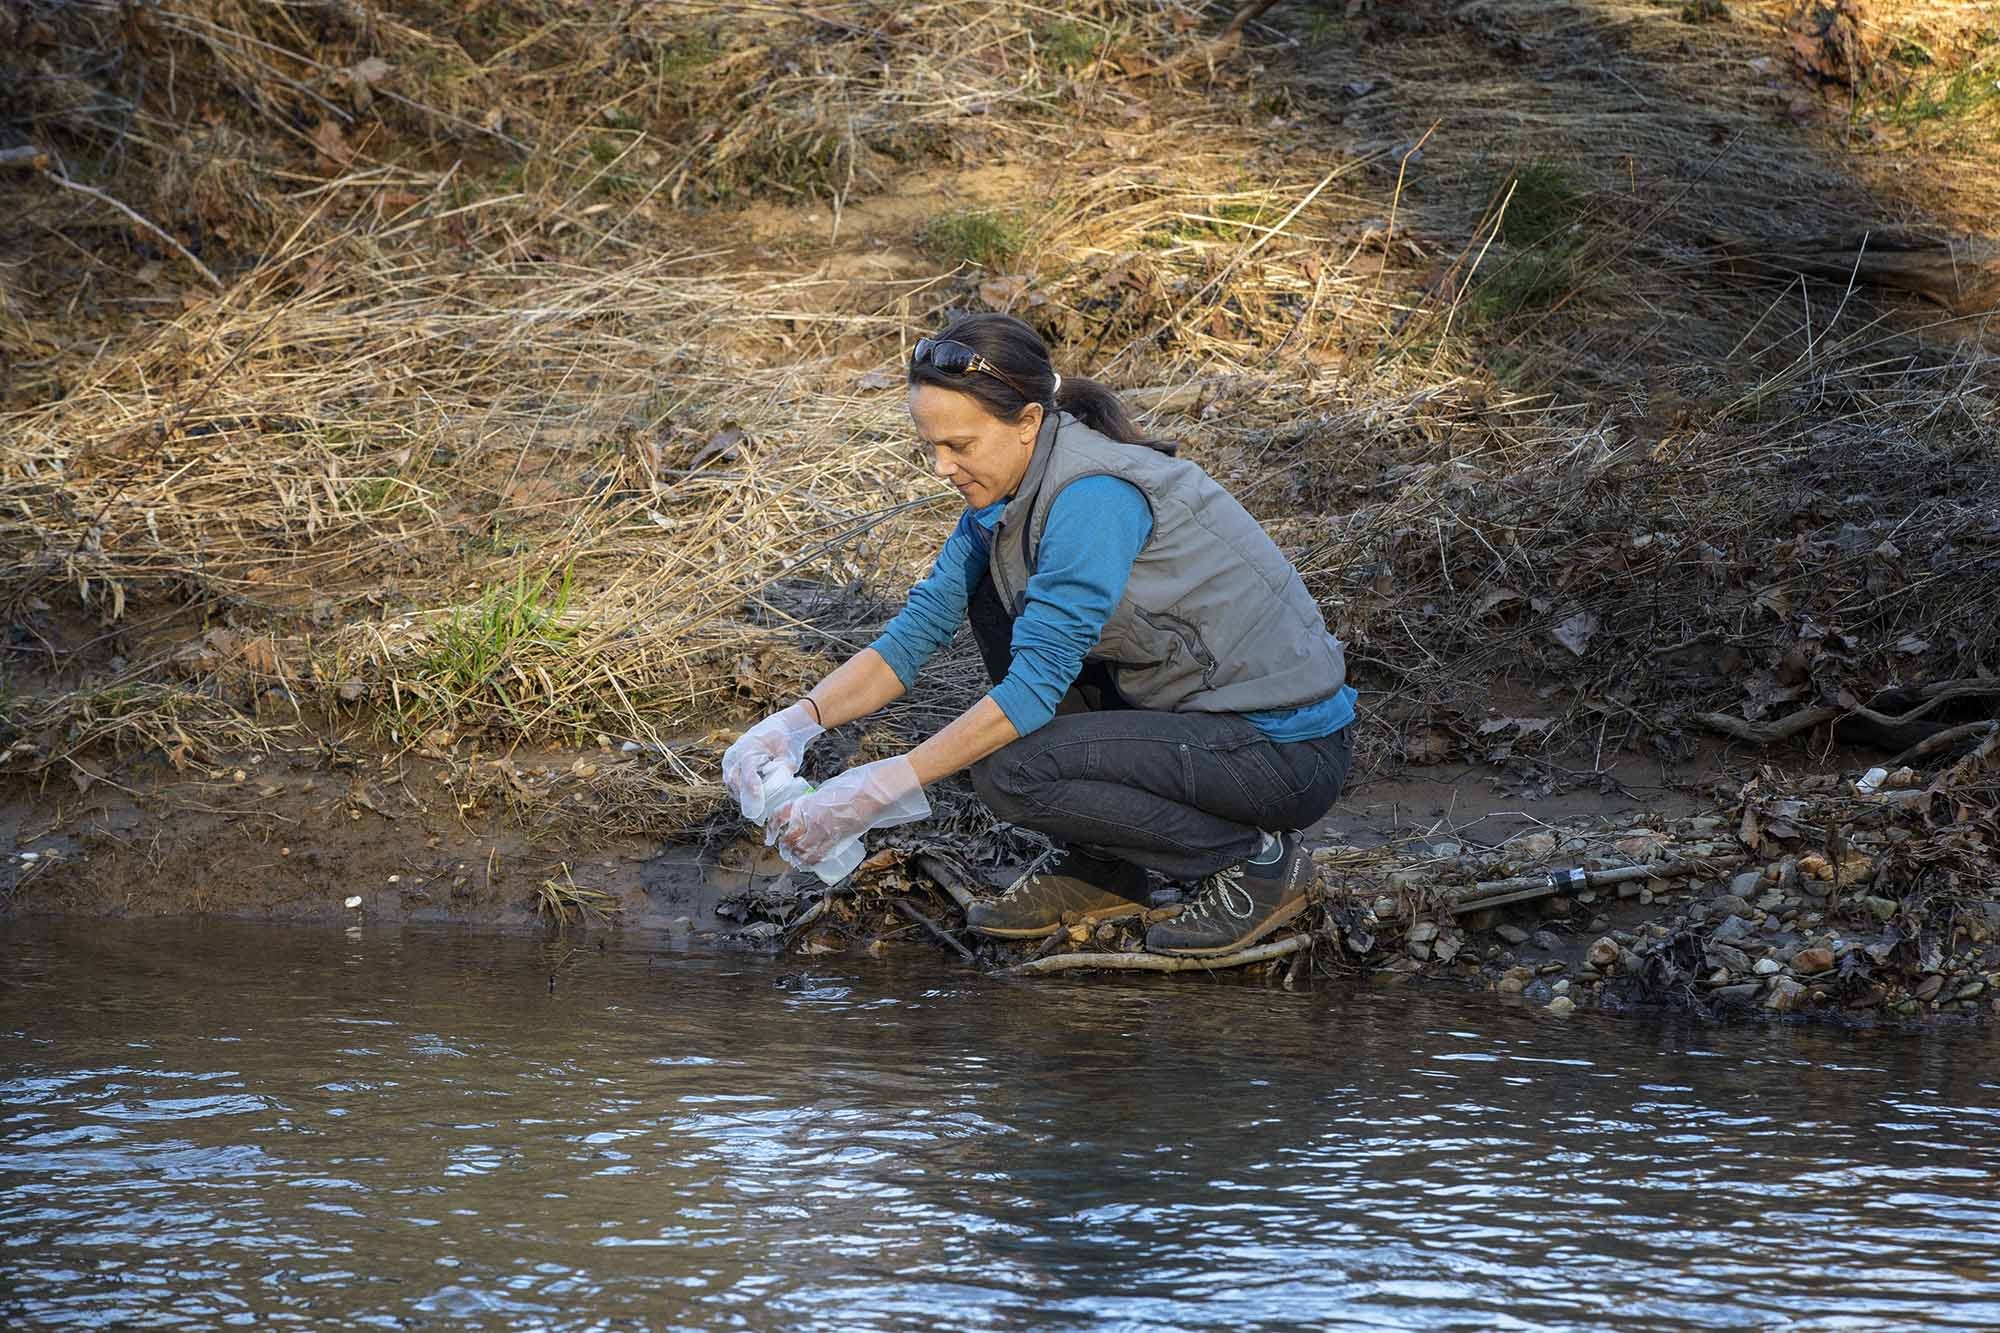 Ami Riscassi collecting a water sample in the national park